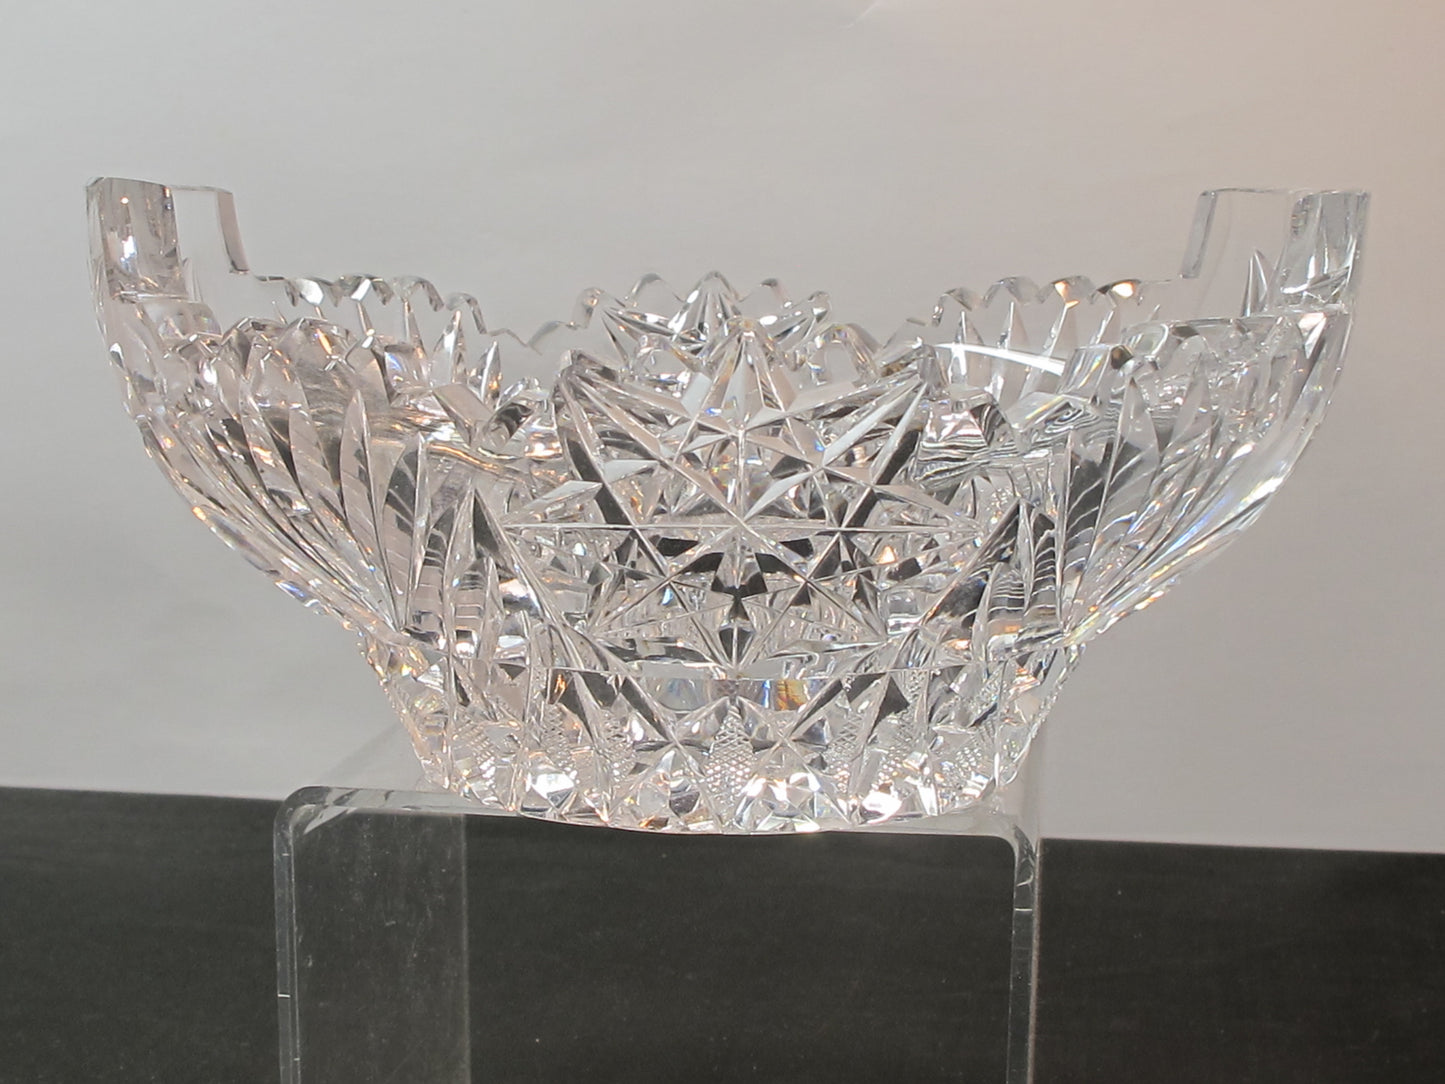 ABP cut glass handle ice tub Antique crystal Made in USA